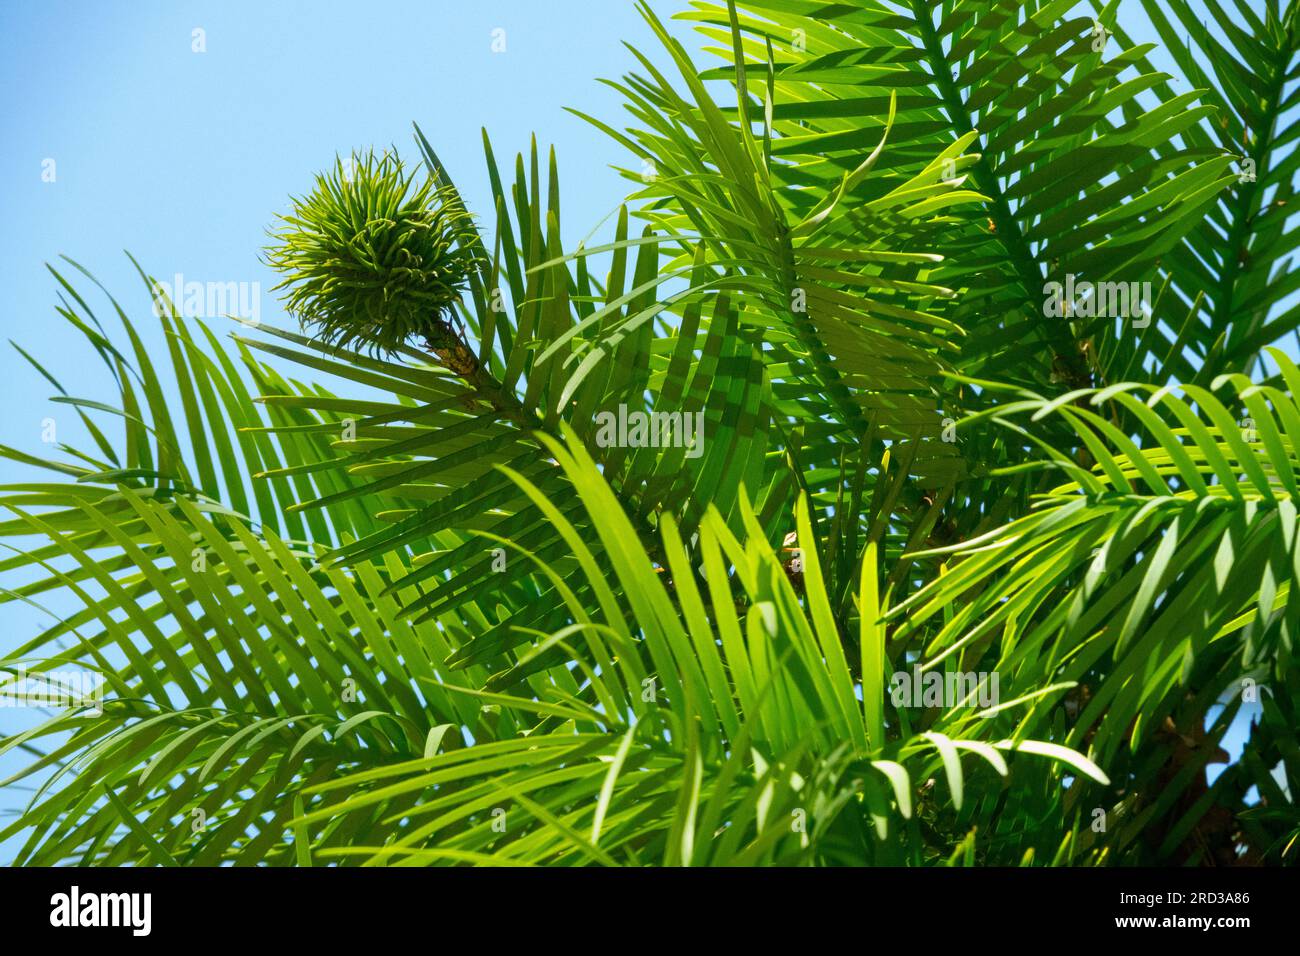 Endangered tree, Wollemia nobilis, Cone, Australian, Native, Tree, Wollemi Pine, Living fossil Stock Photo